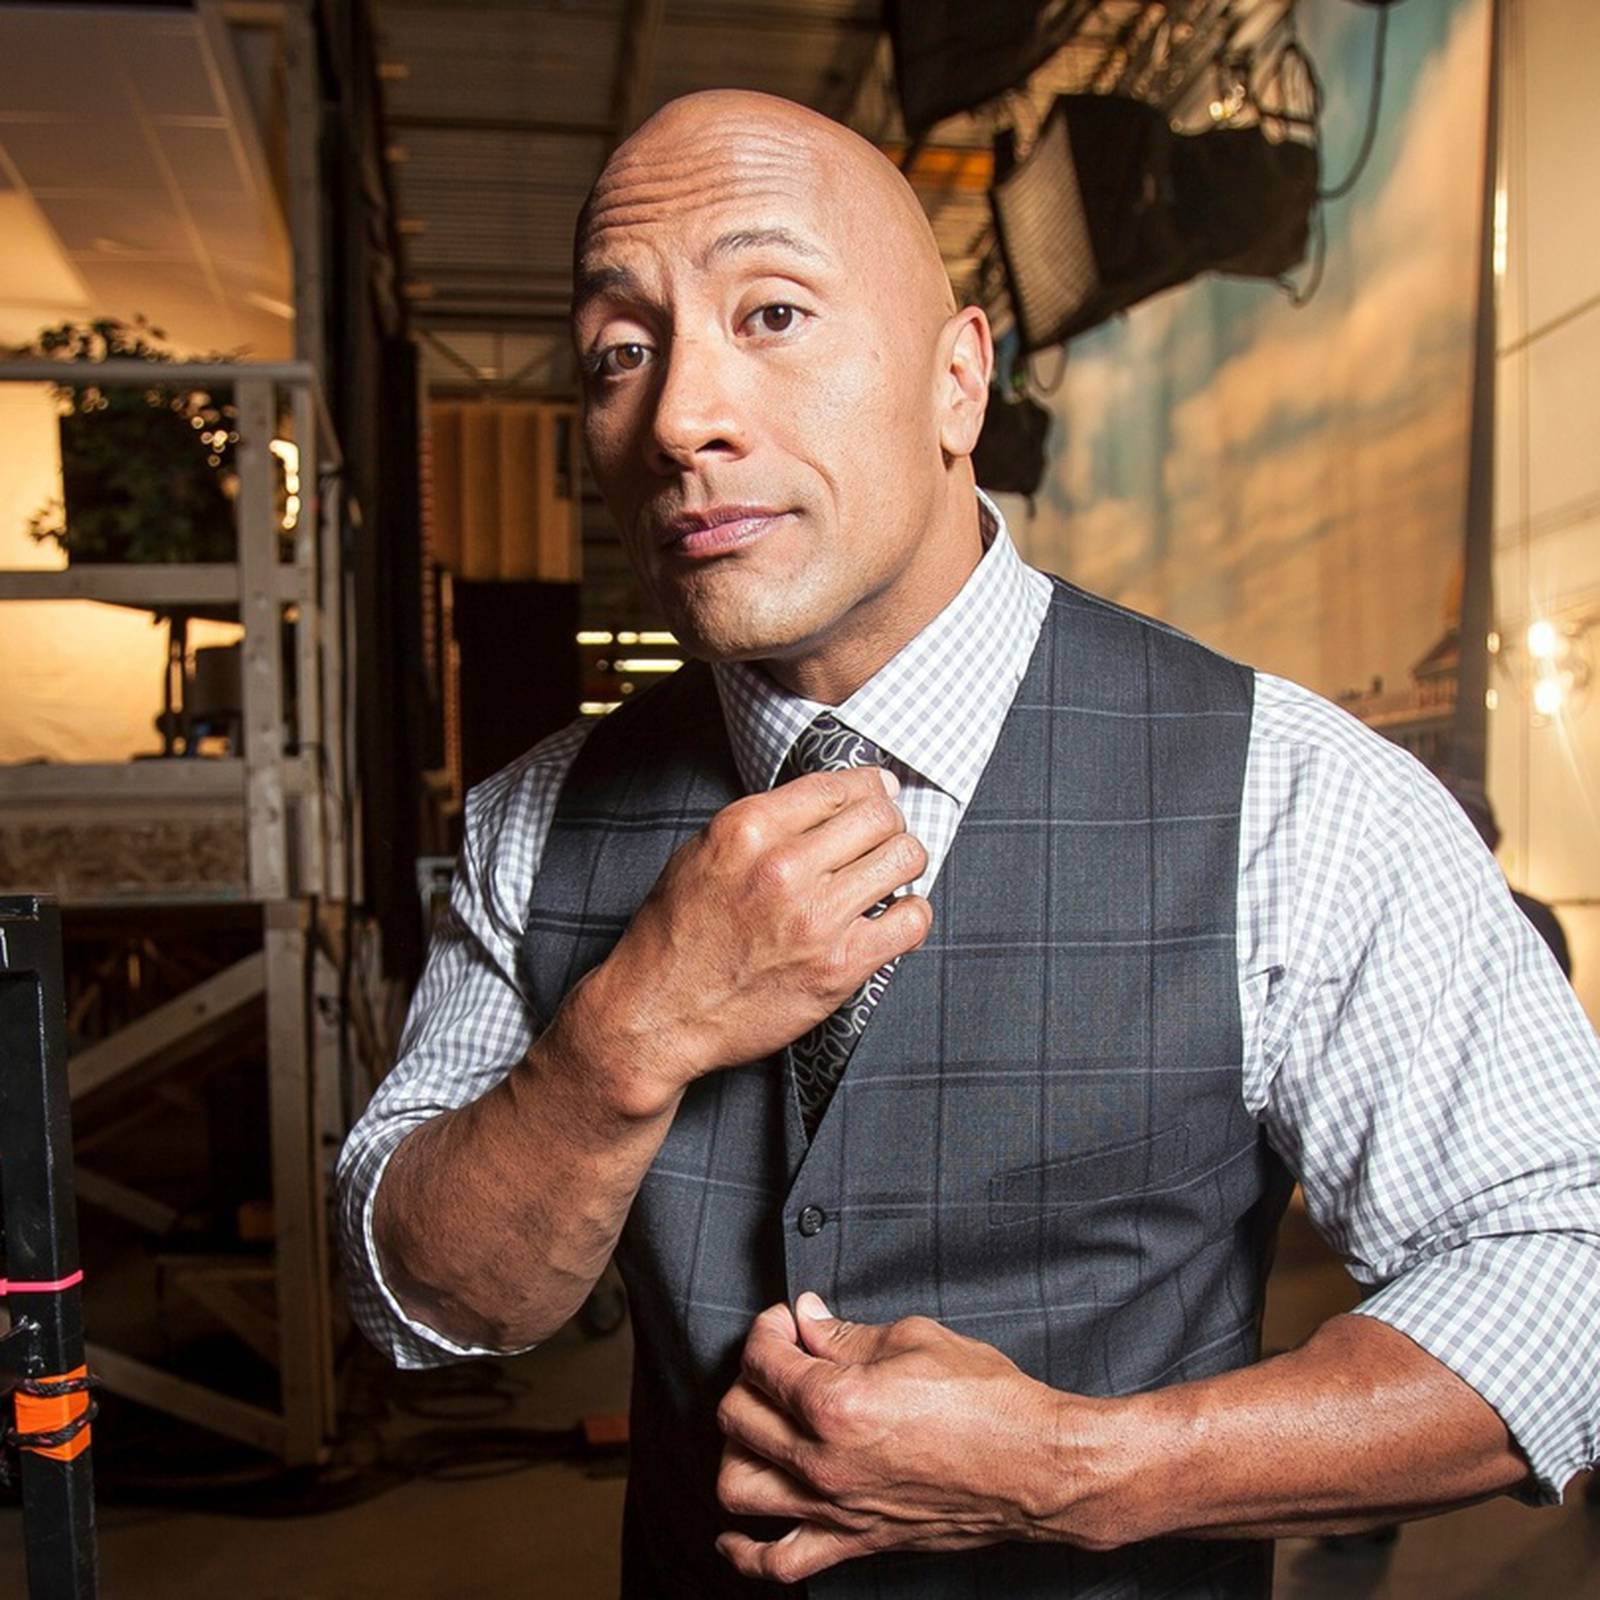 Dwayne Johnson and His Watch Are Both Crowd Pleasers